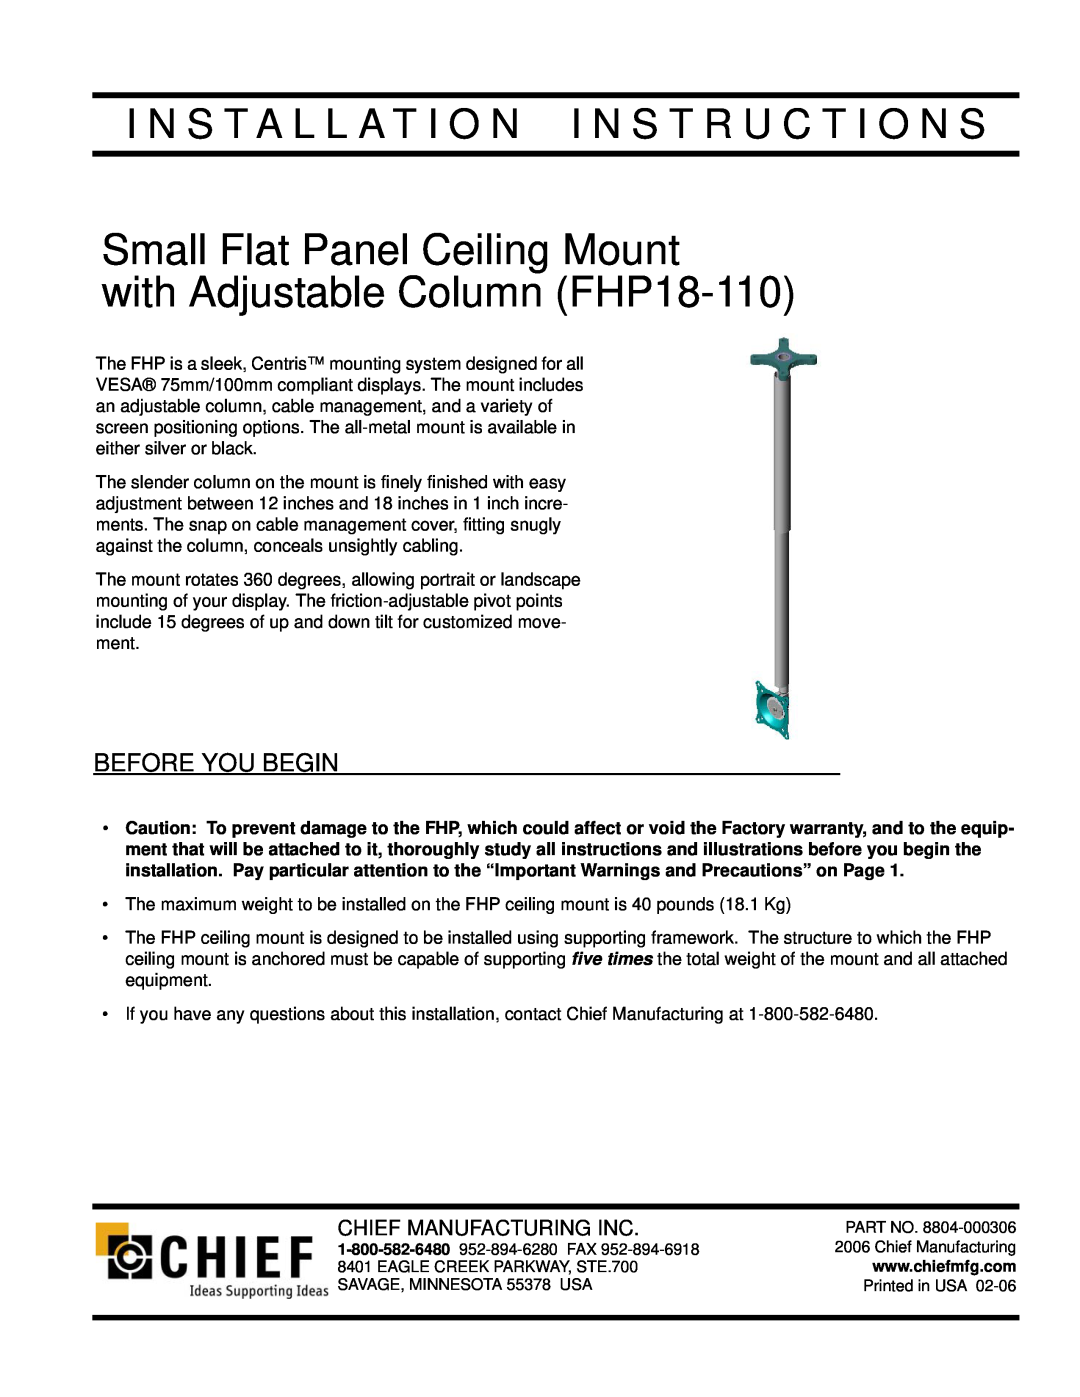 Chief Manufacturing FHP18-110 installation instructions Before You Begin, Small Flat Panel Ceiling Mount 